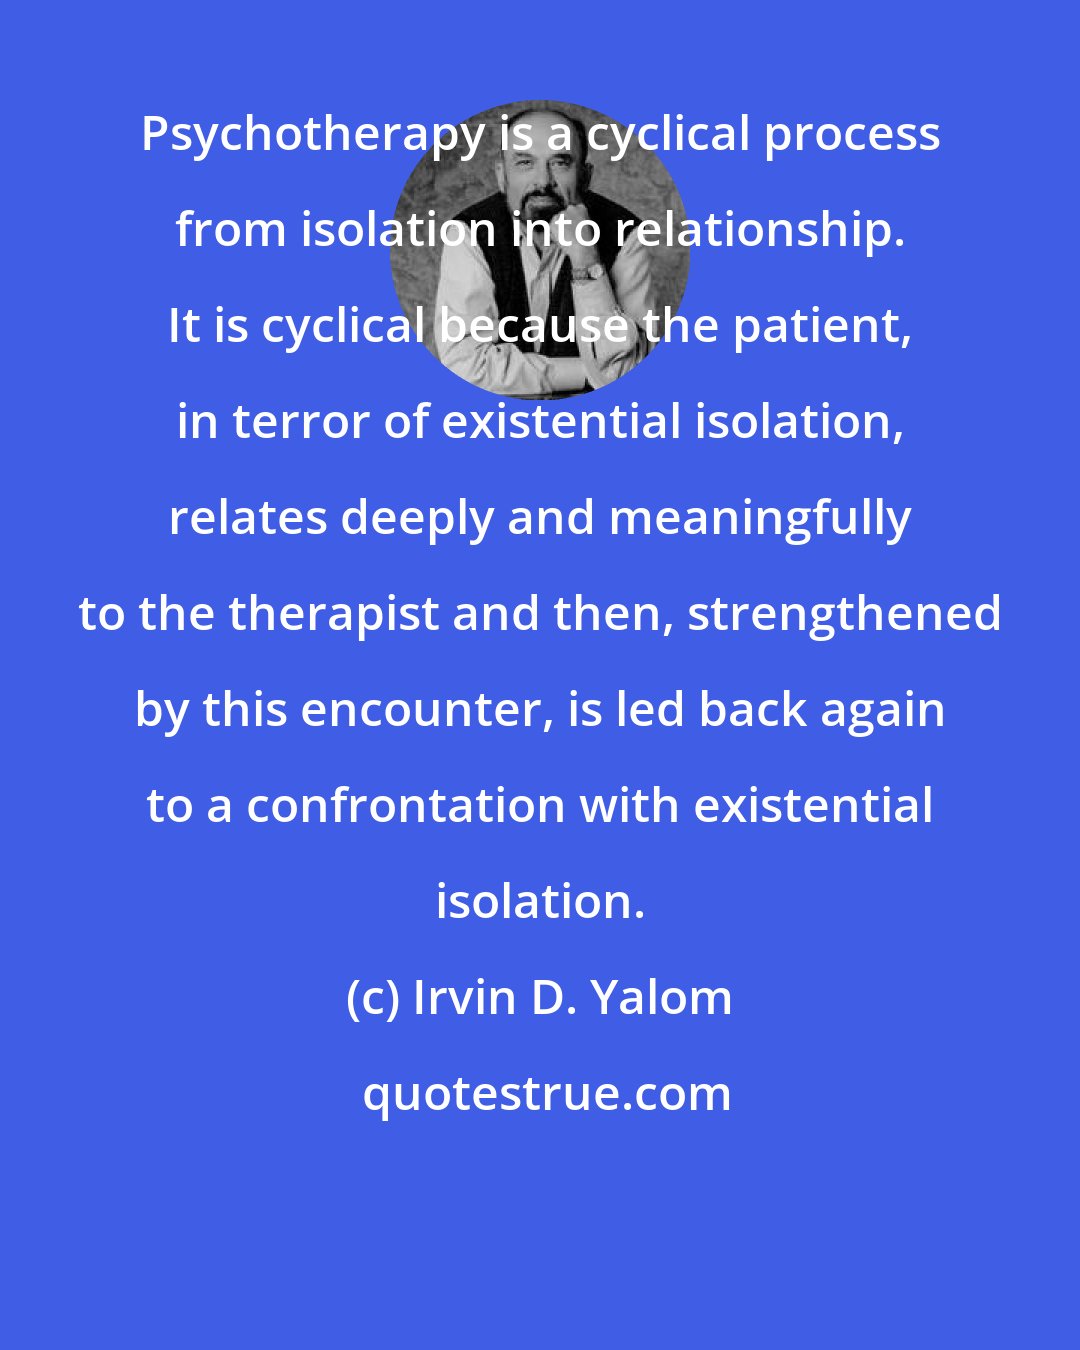 Irvin D. Yalom: Psychotherapy is a cyclical process from isolation into relationship. It is cyclical because the patient, in terror of existential isolation, relates deeply and meaningfully to the therapist and then, strengthened by this encounter, is led back again to a confrontation with existential isolation.